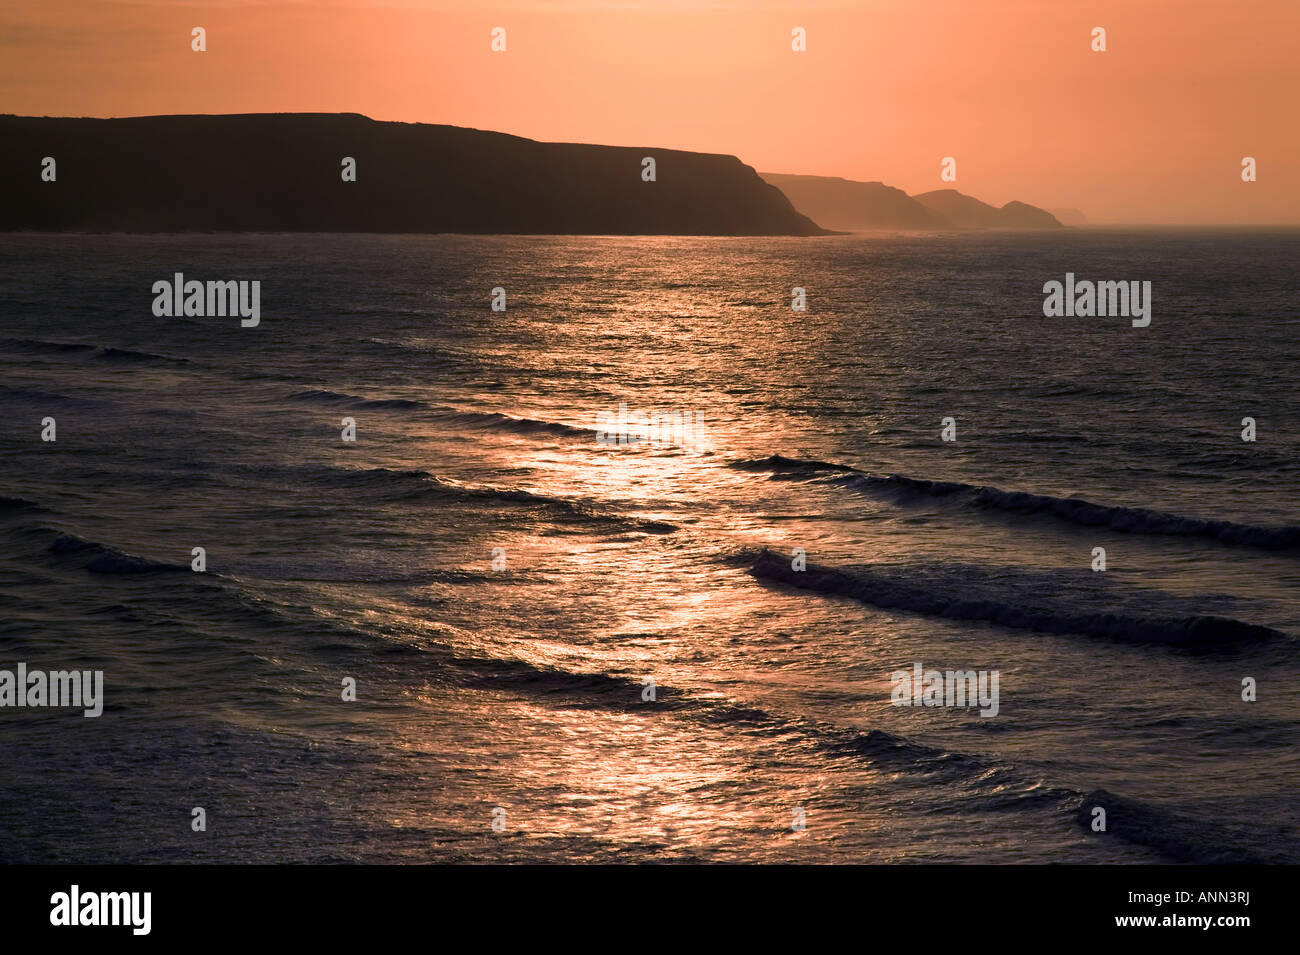 Seascape sunset with cliffs on the horizon Stock Photo